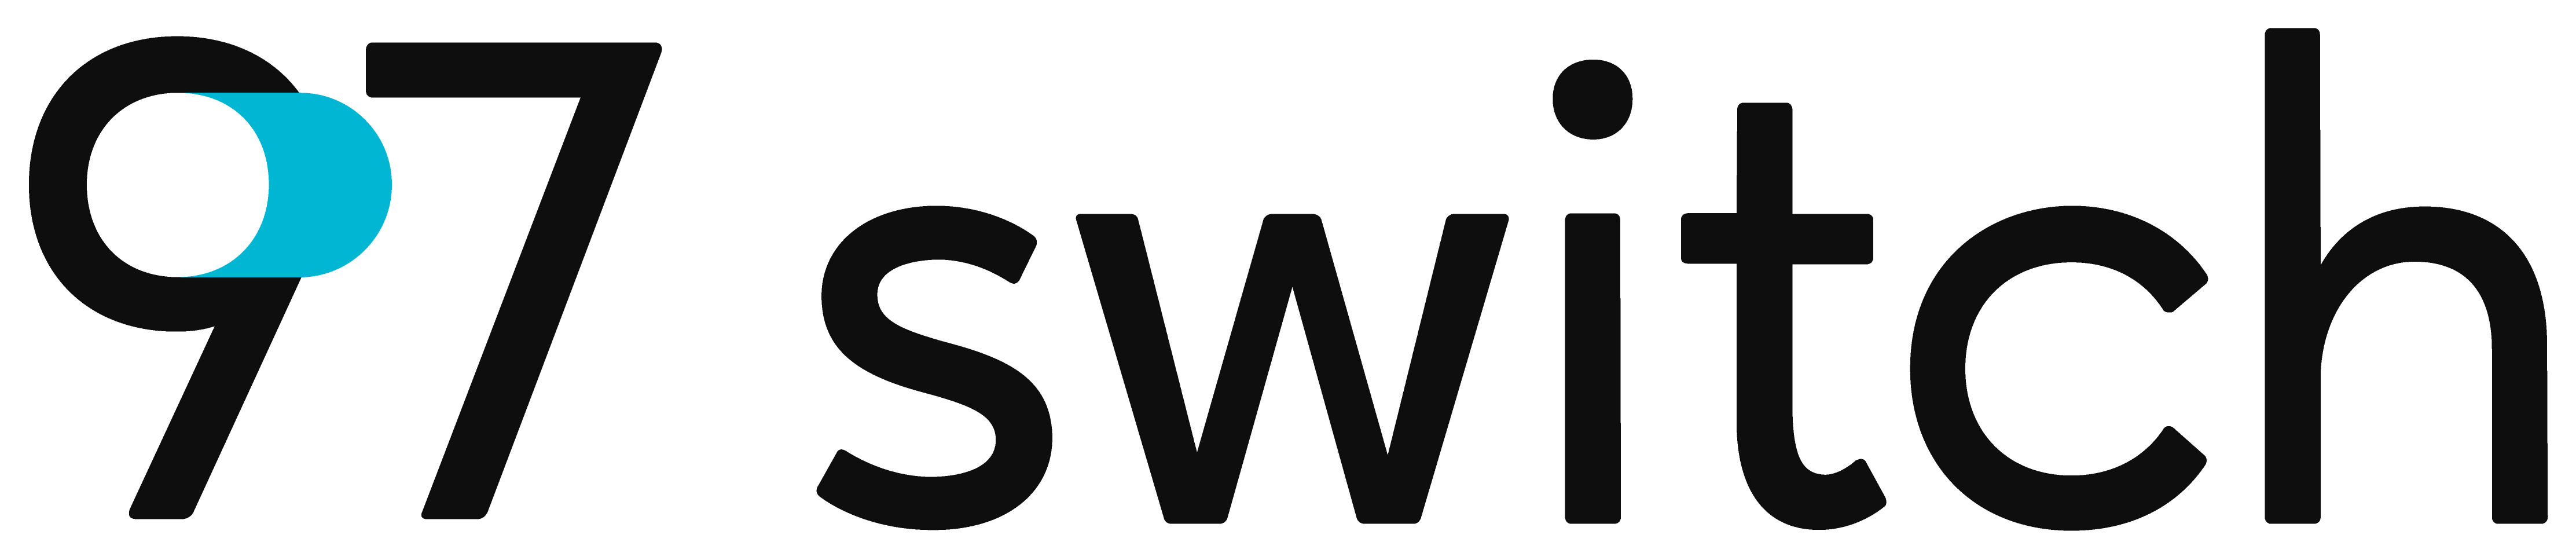 Top BigCommerce Design Business Logo: 97 Switch